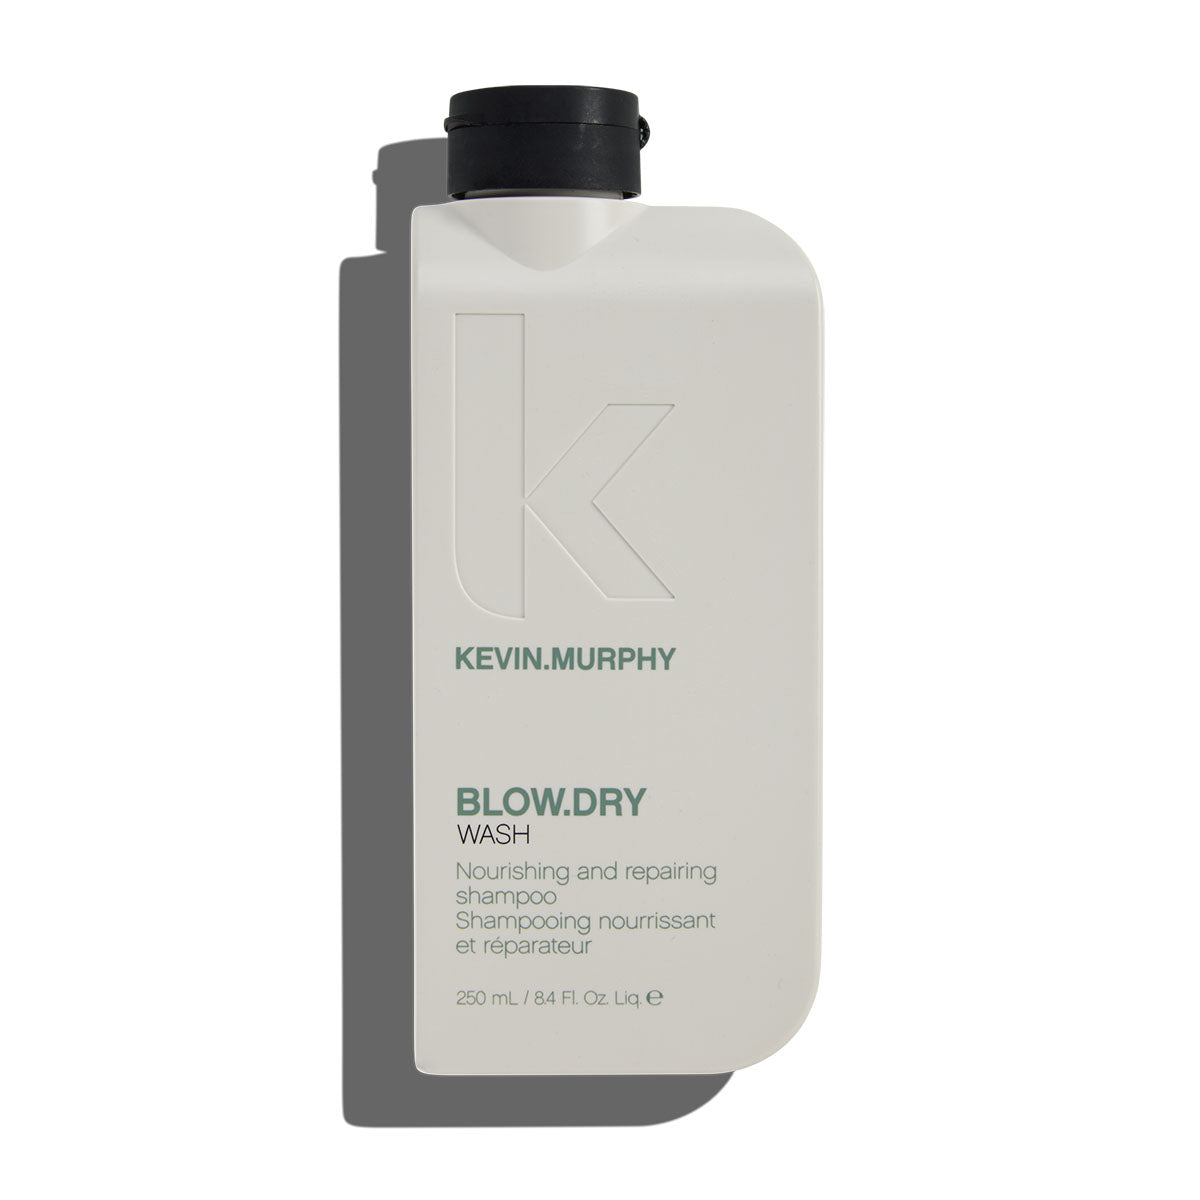 KEVIN.MURPHY Blow Dry Wash 250ml